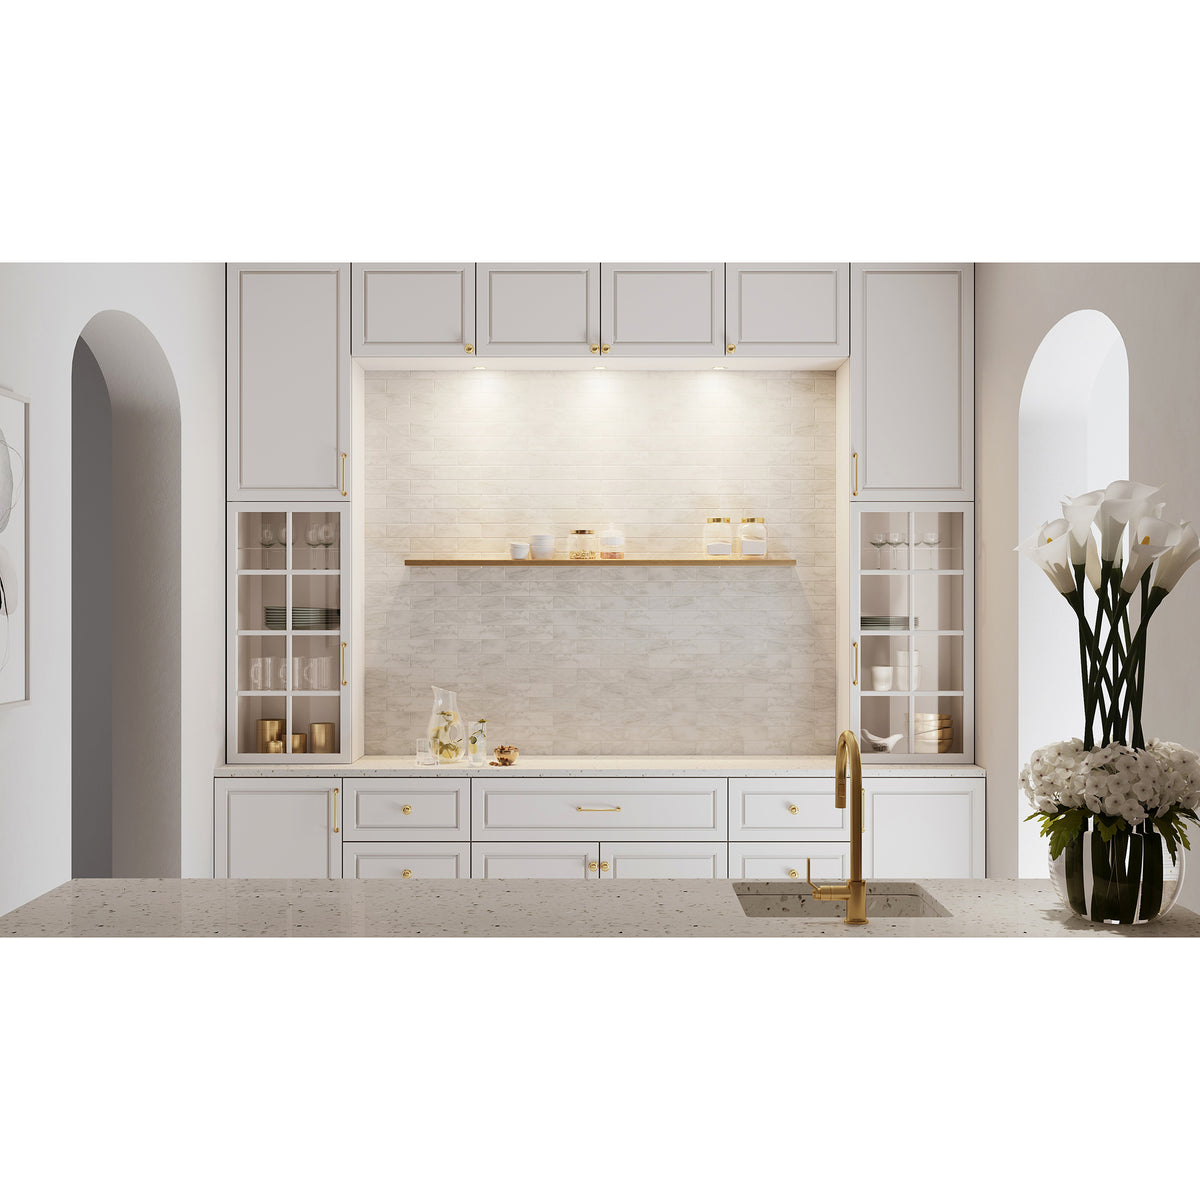 Shown in Montclair Marble Main Product Slider View